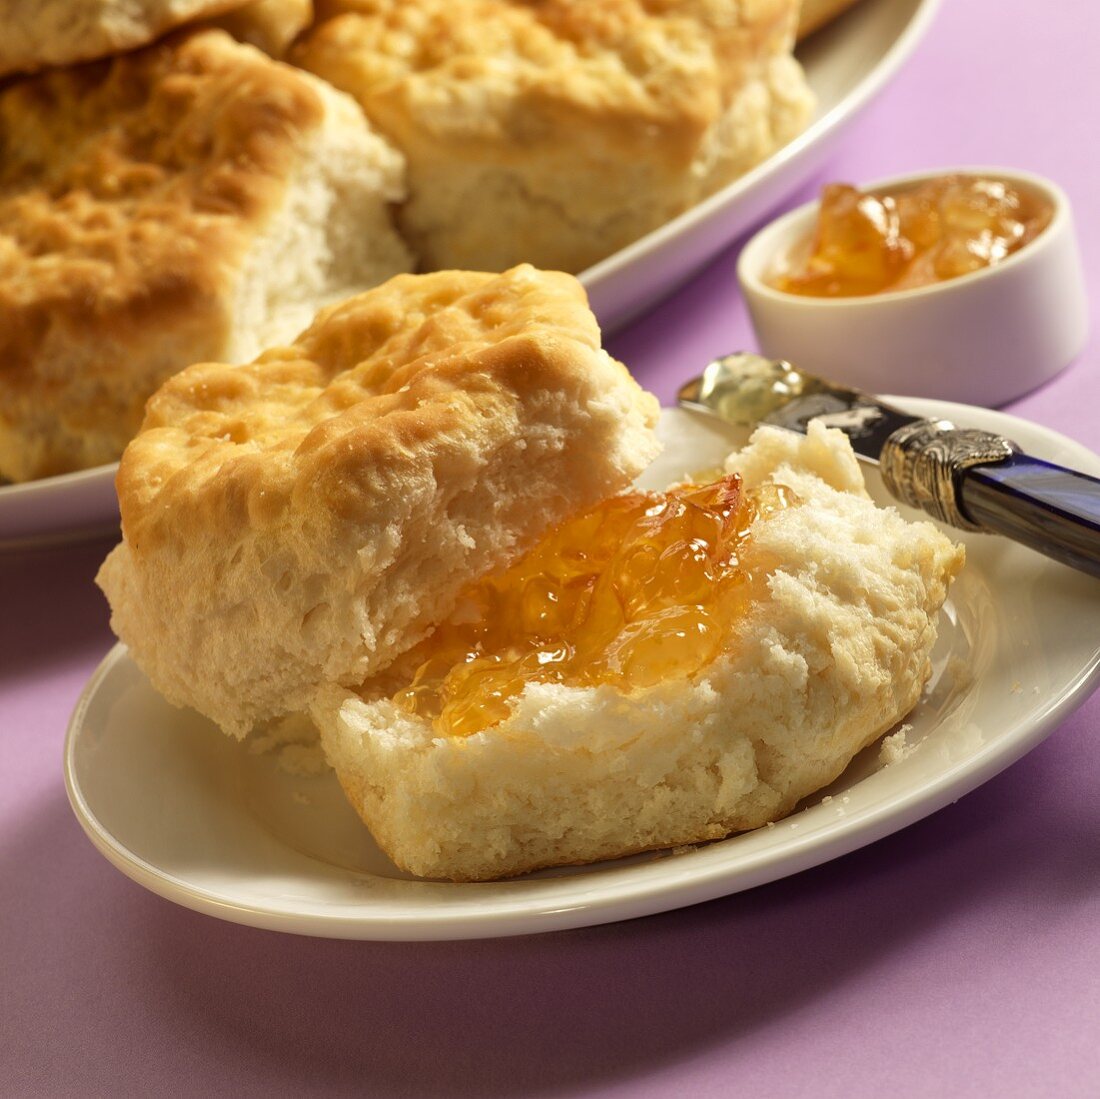 Biscuit with Orange Marmalade on a Plate; Knife; Plate of Biscuits